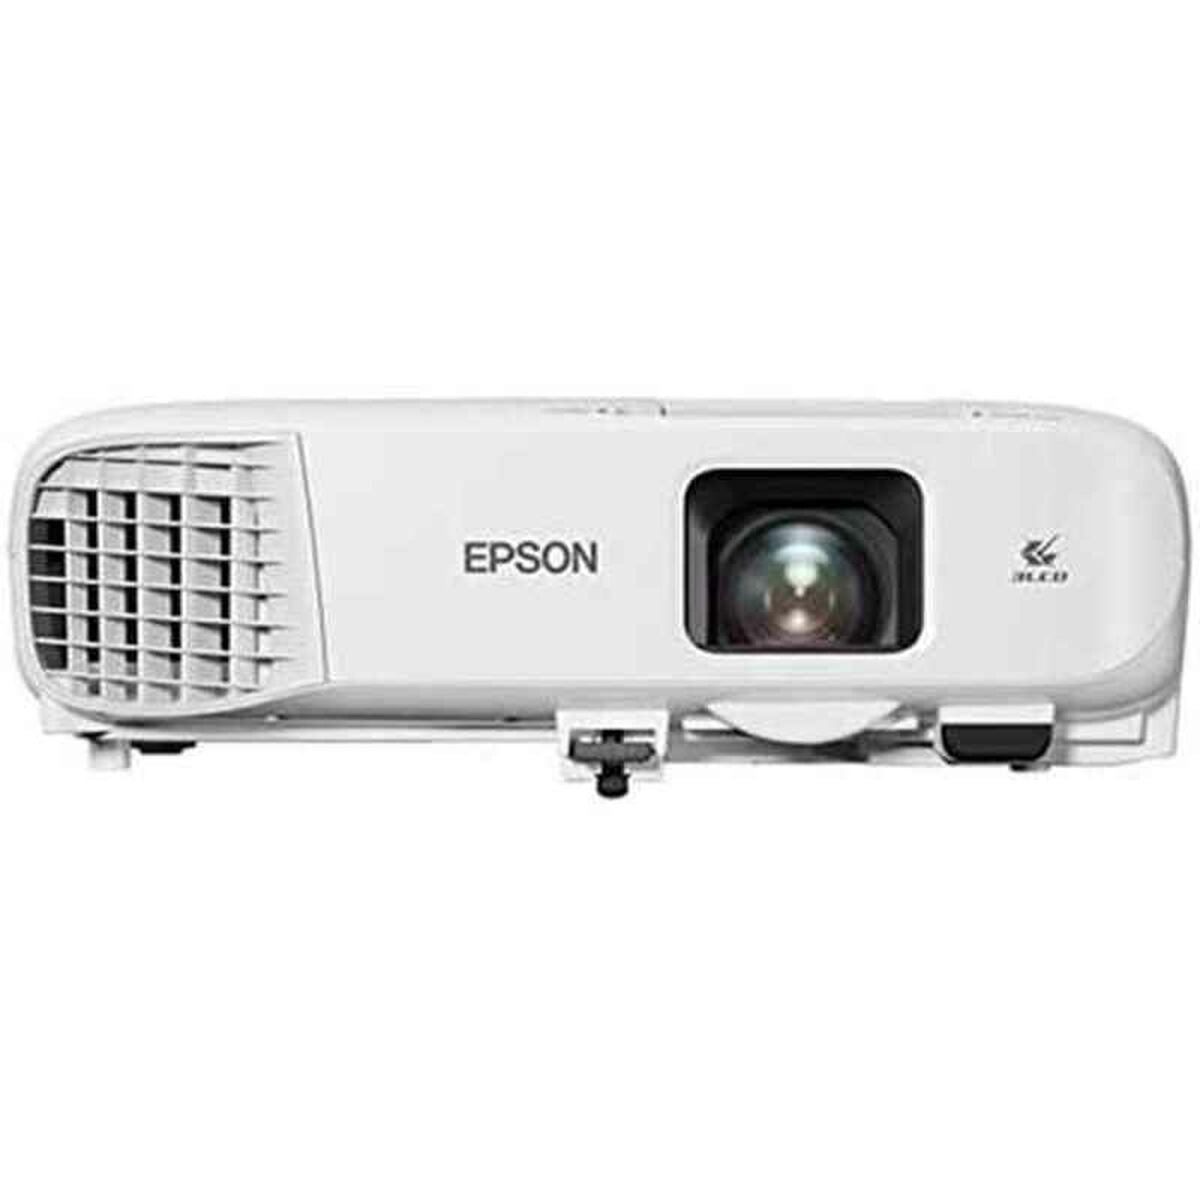 Projector Epson EB-E20 3400 Lm White XGA, Epson, Electronics, TV, Video and home cinema, projector-epson-v11h981040-3400-lm-white, Brand_Epson, category-reference-2609, category-reference-2642, category-reference-2947, category-reference-t-18805, category-reference-t-19653, cinema and television, computers / peripherals, Condition_NEW, entertainment, office, Price_500 - 600, RiotNook